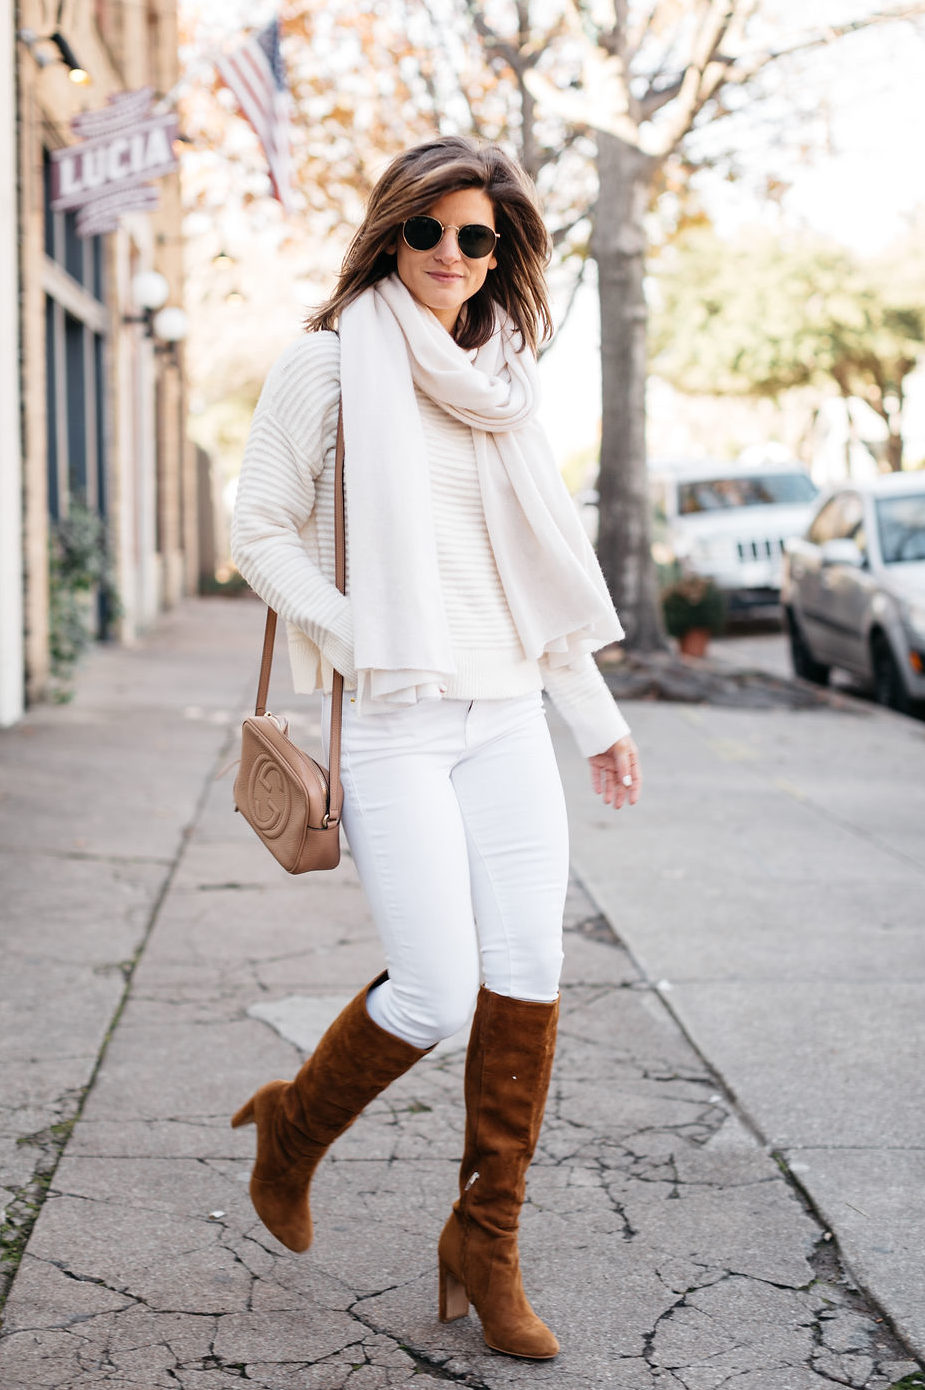 winter white outfit, brighton keller wearing white jeans and cream sweater monochromatic outfit